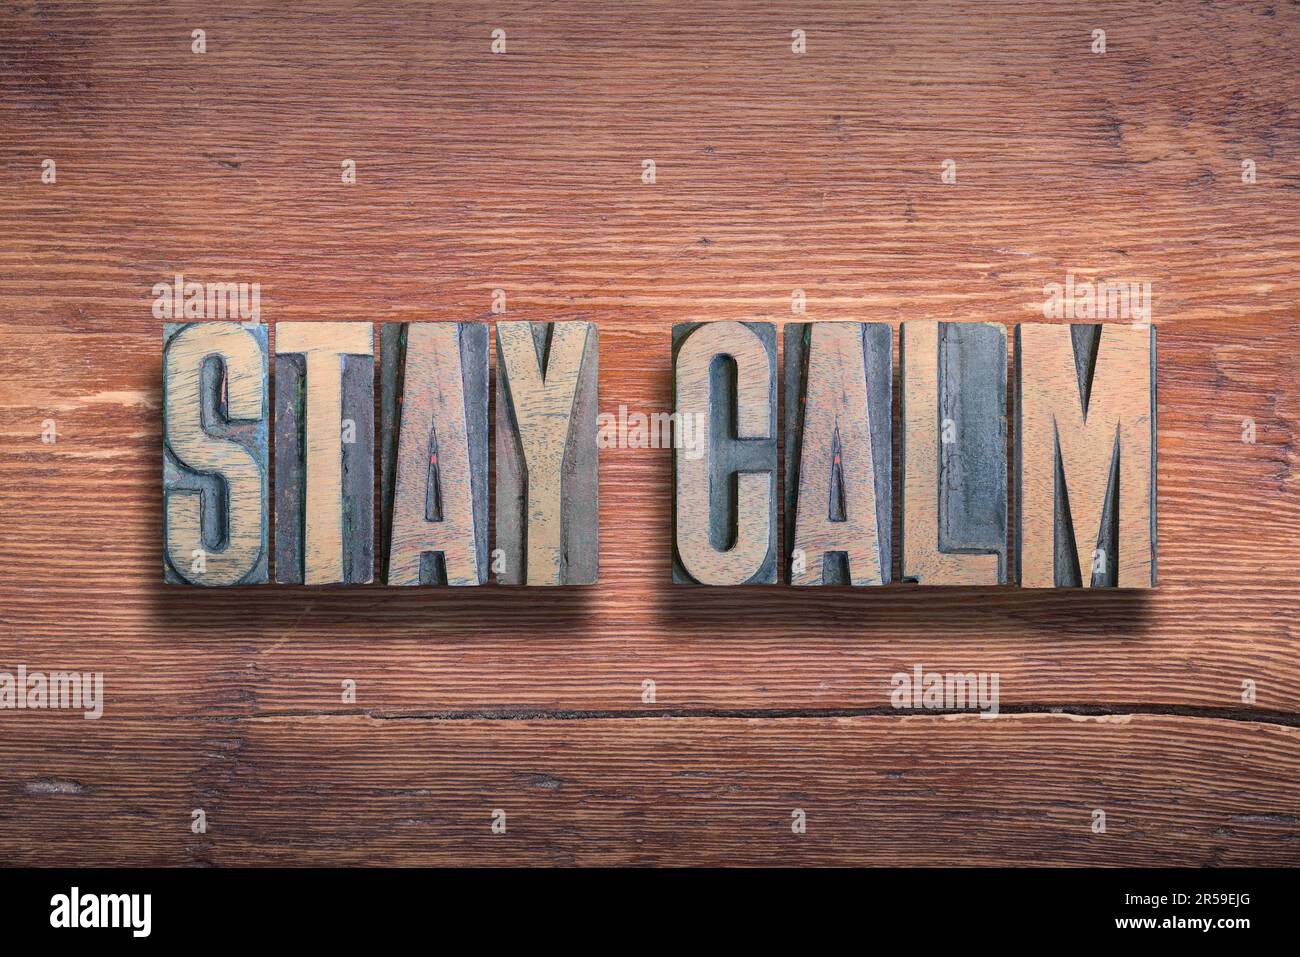 stay calm phrase combined on vintage varnished wooden surface Stock Photo